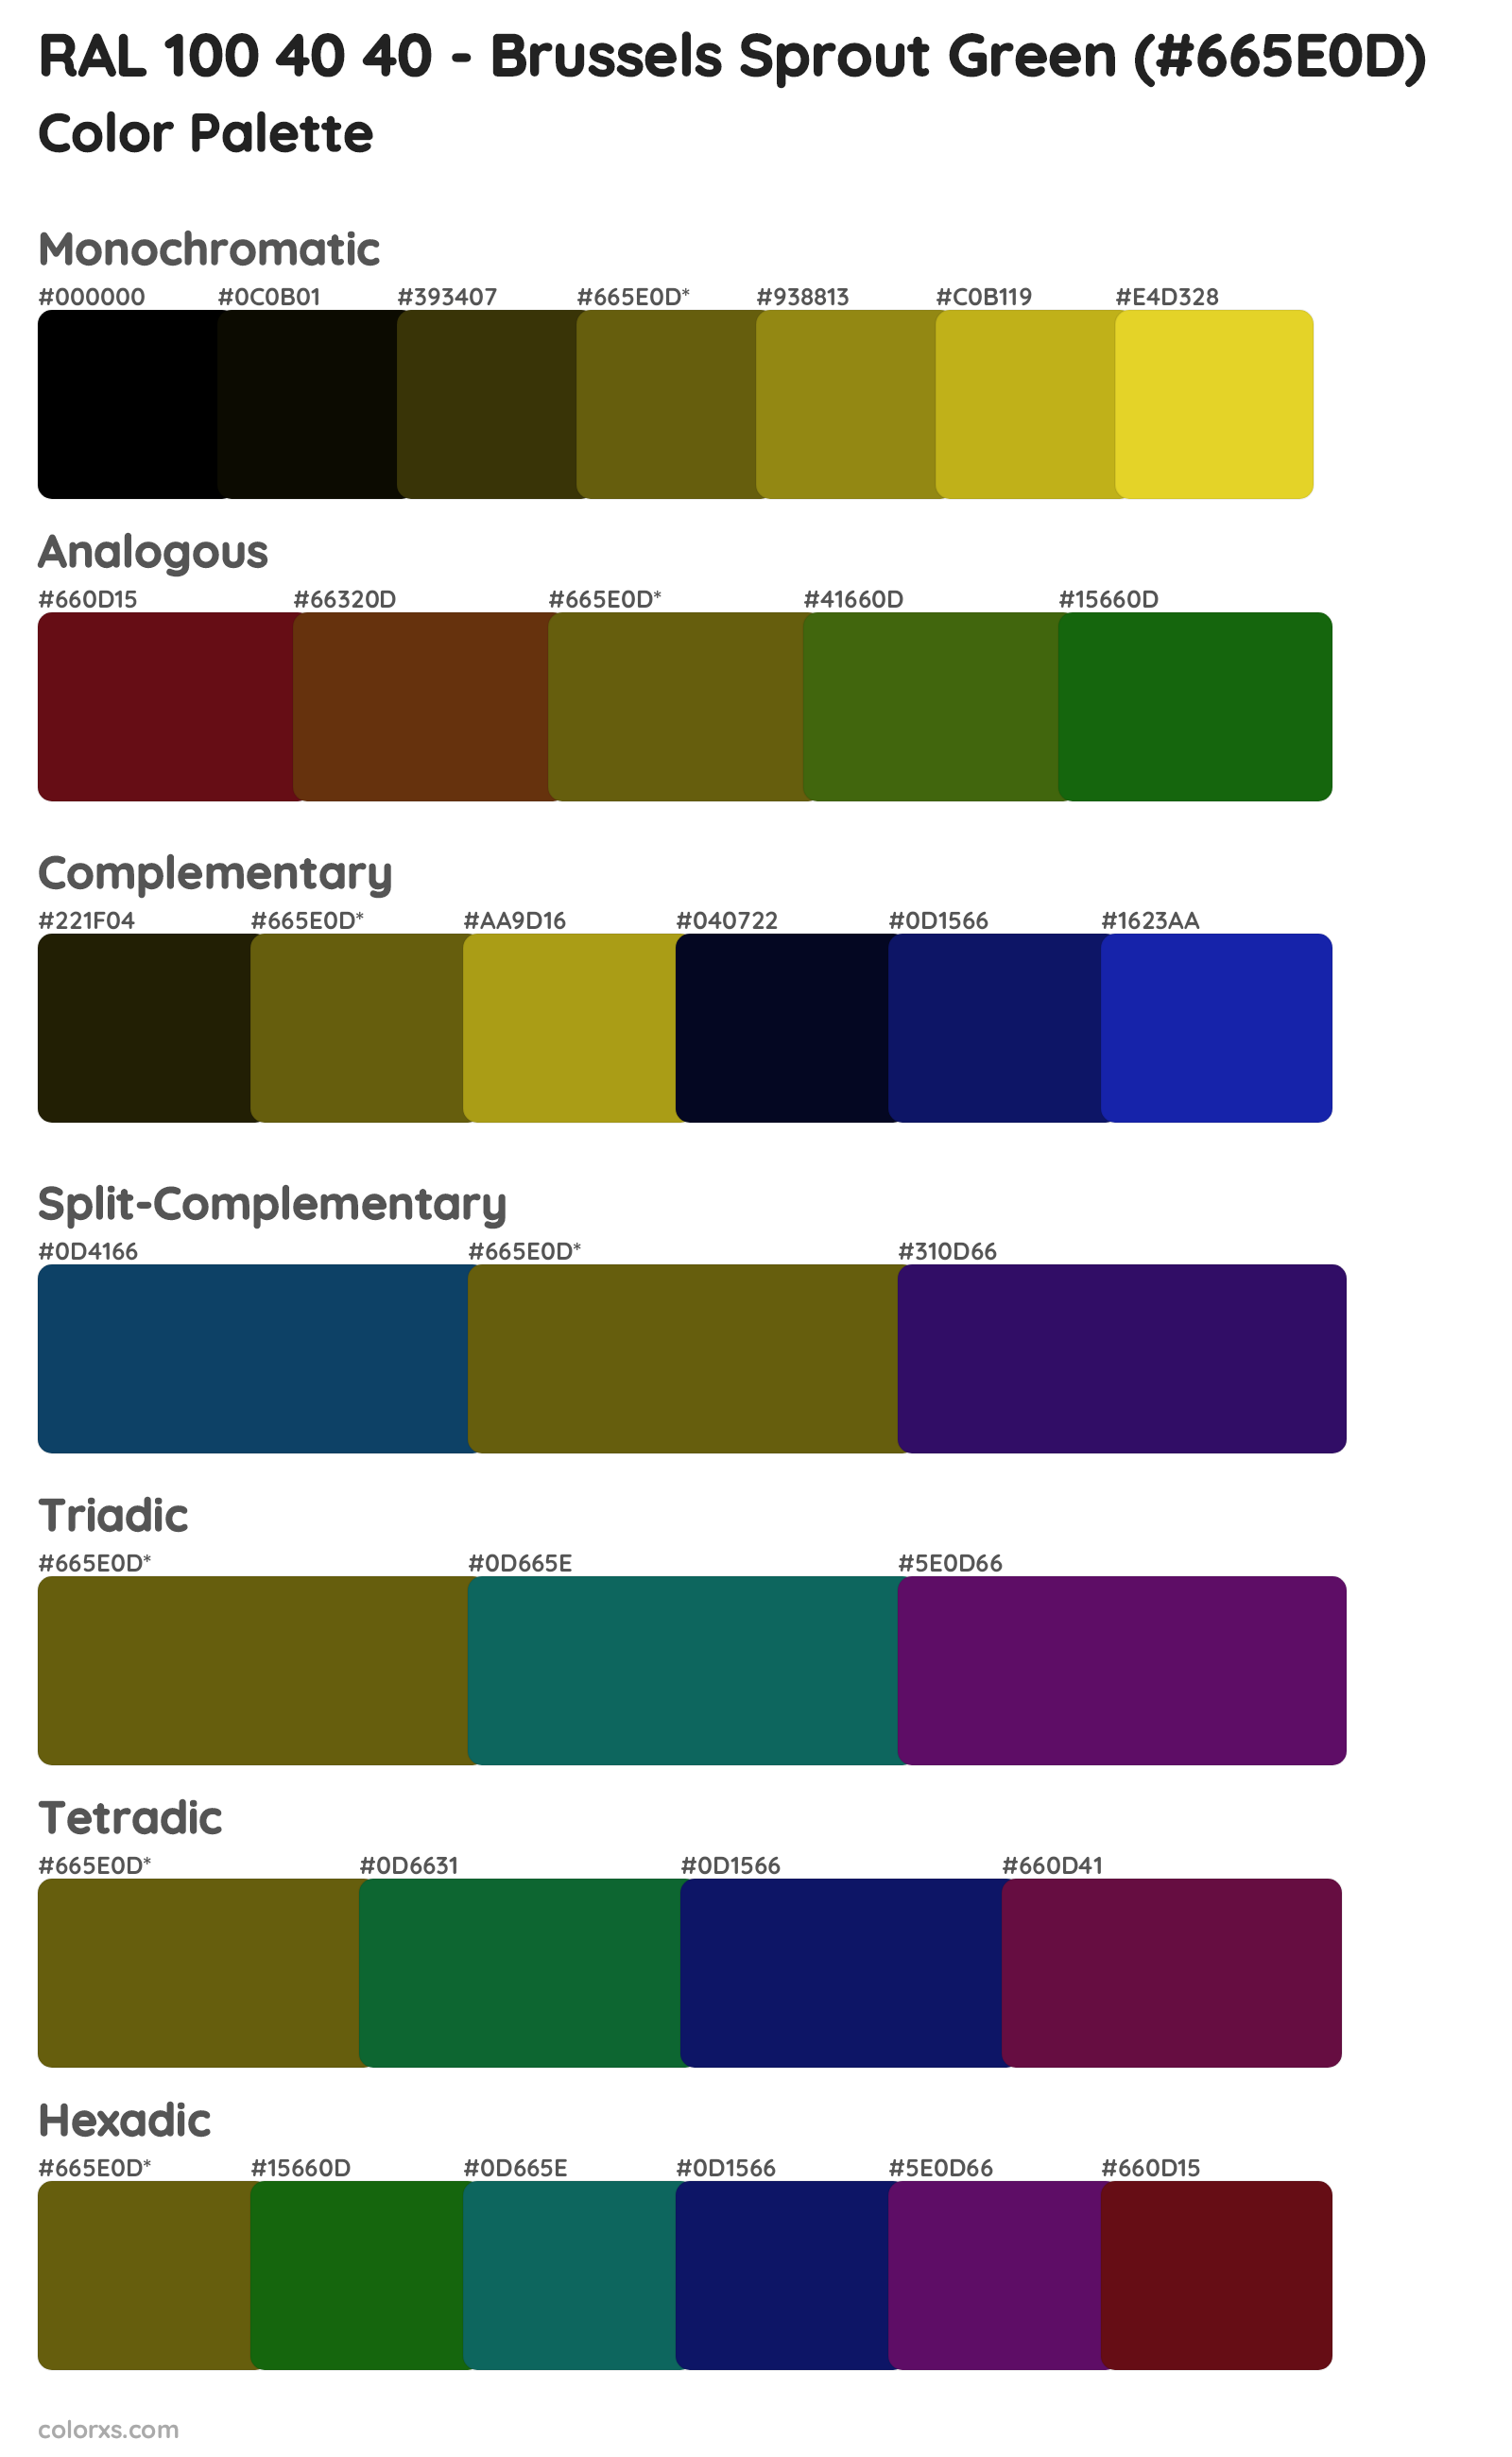 RAL 100 40 40 - Brussels Sprout Green Color Scheme Palettes